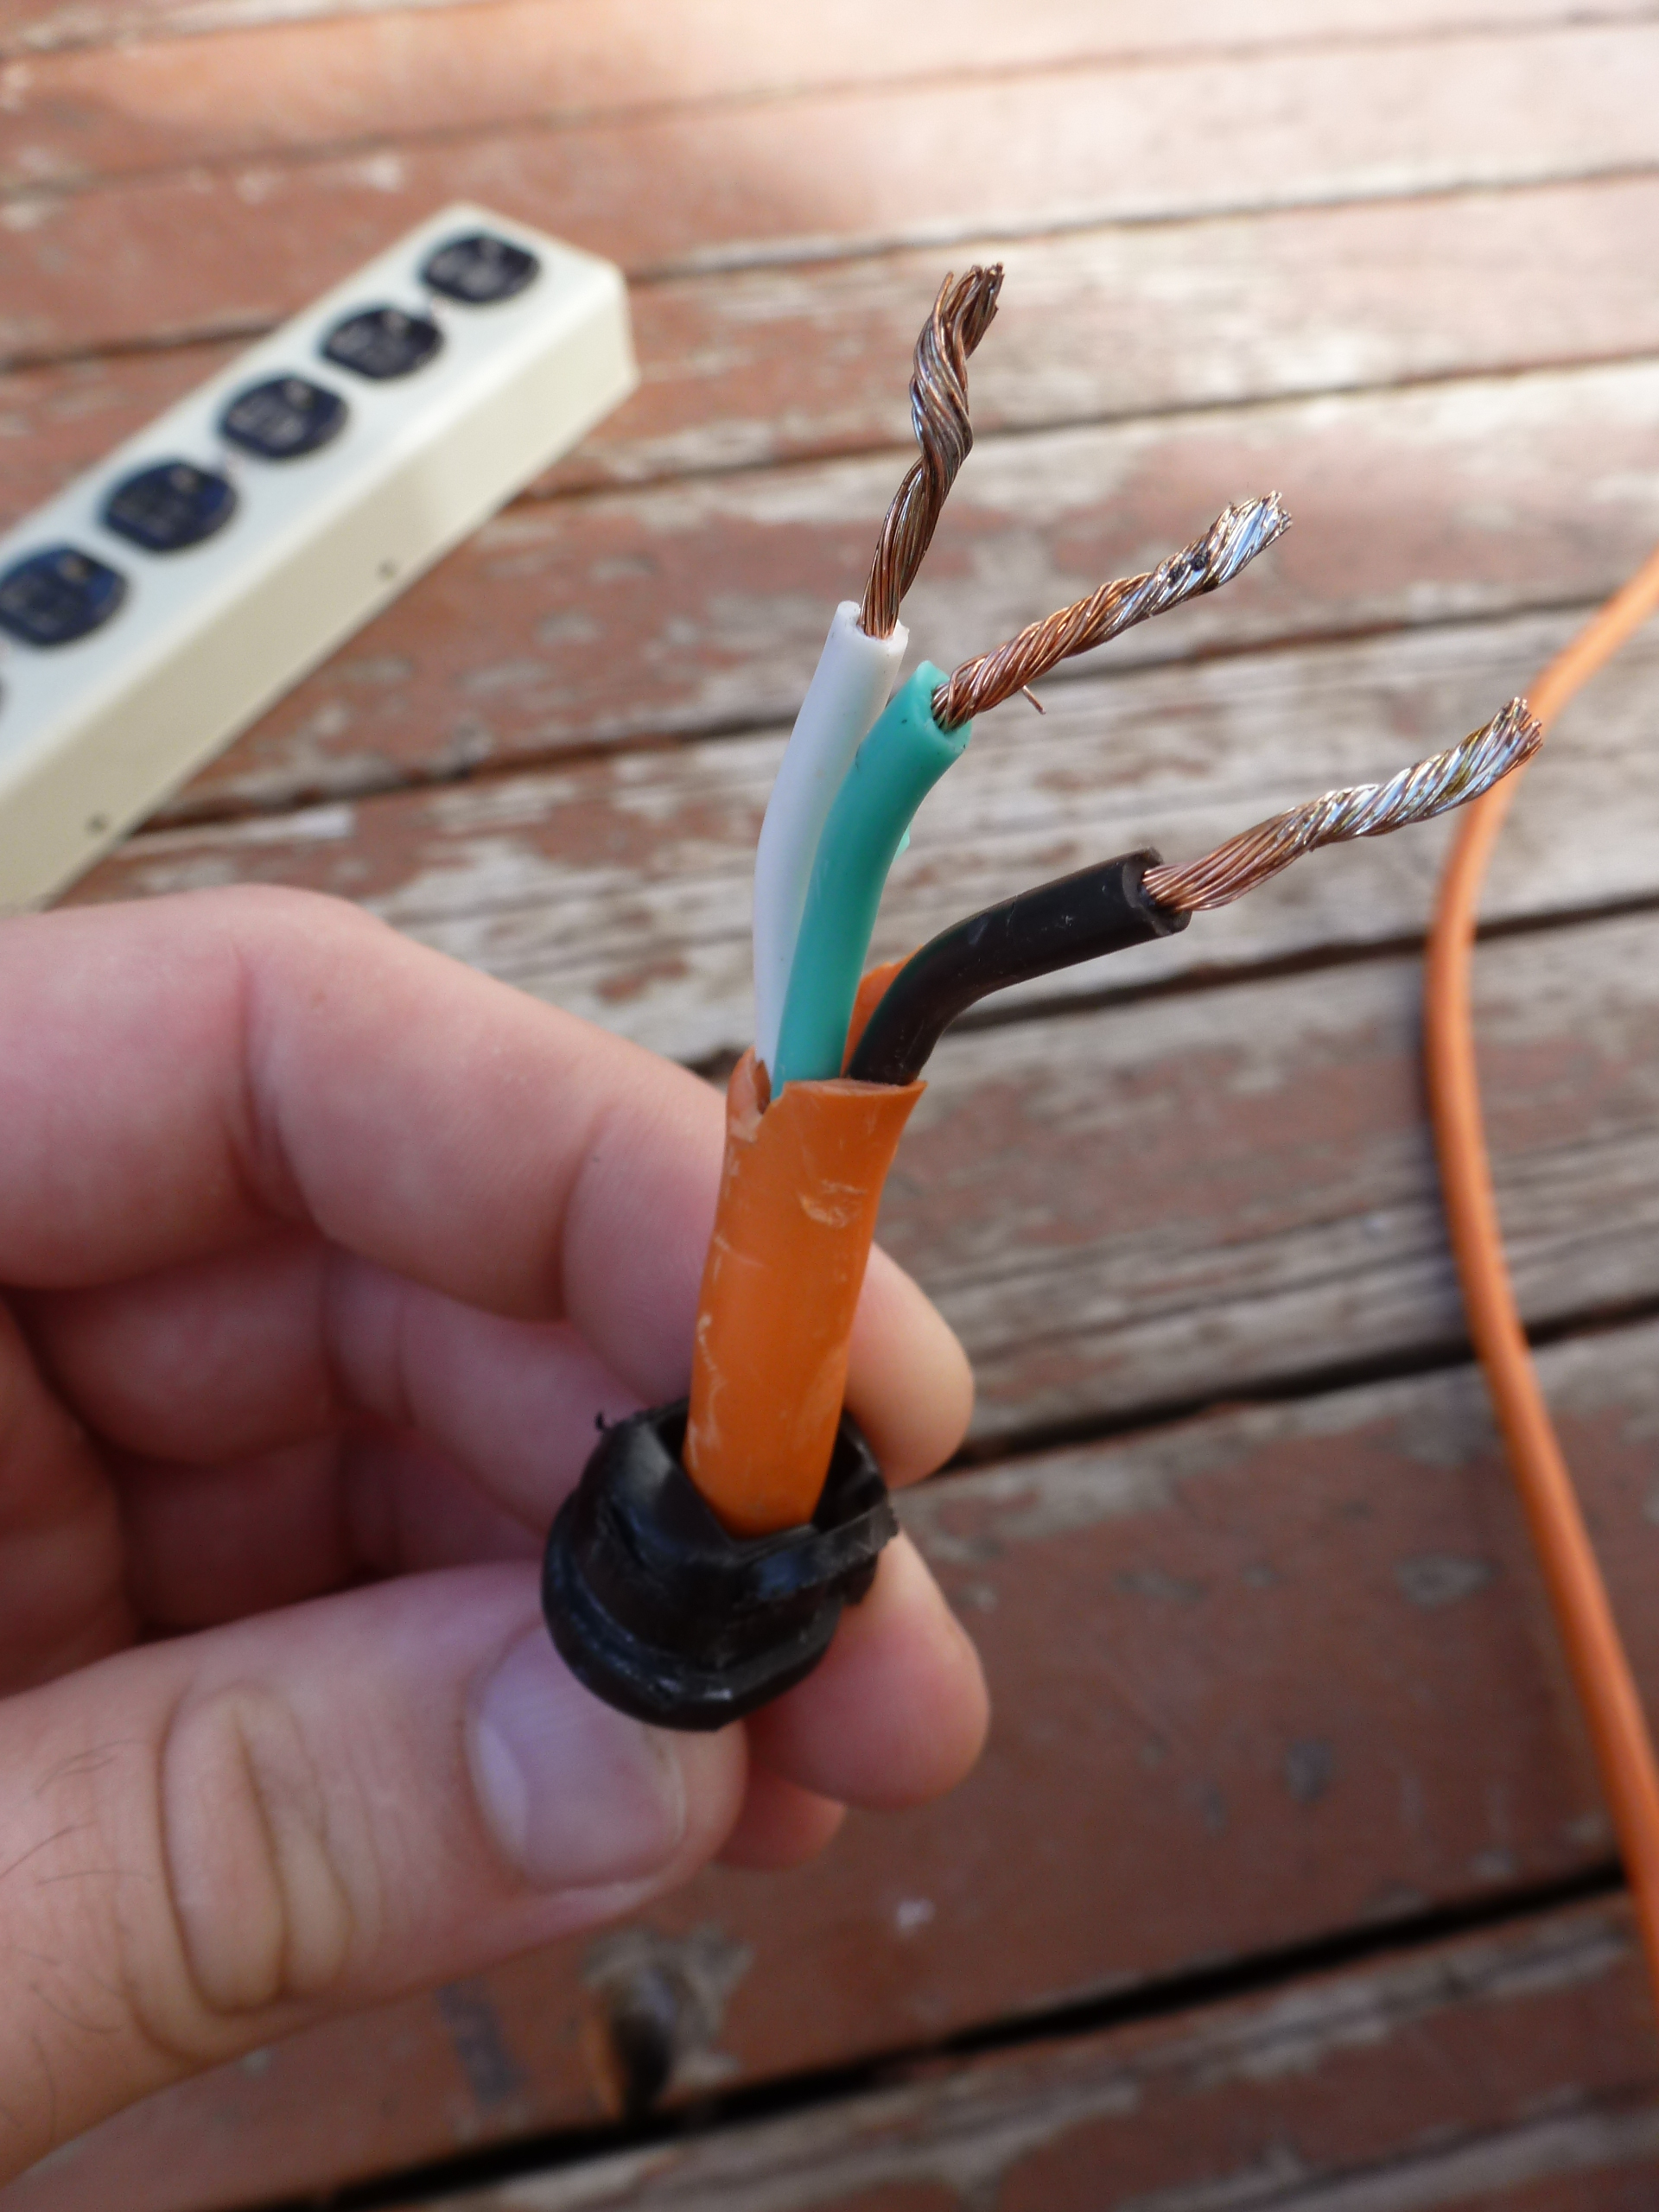 Turtles And Tails: Diy A Built-In Extension Outlet - Extension Cord Wiring Diagram